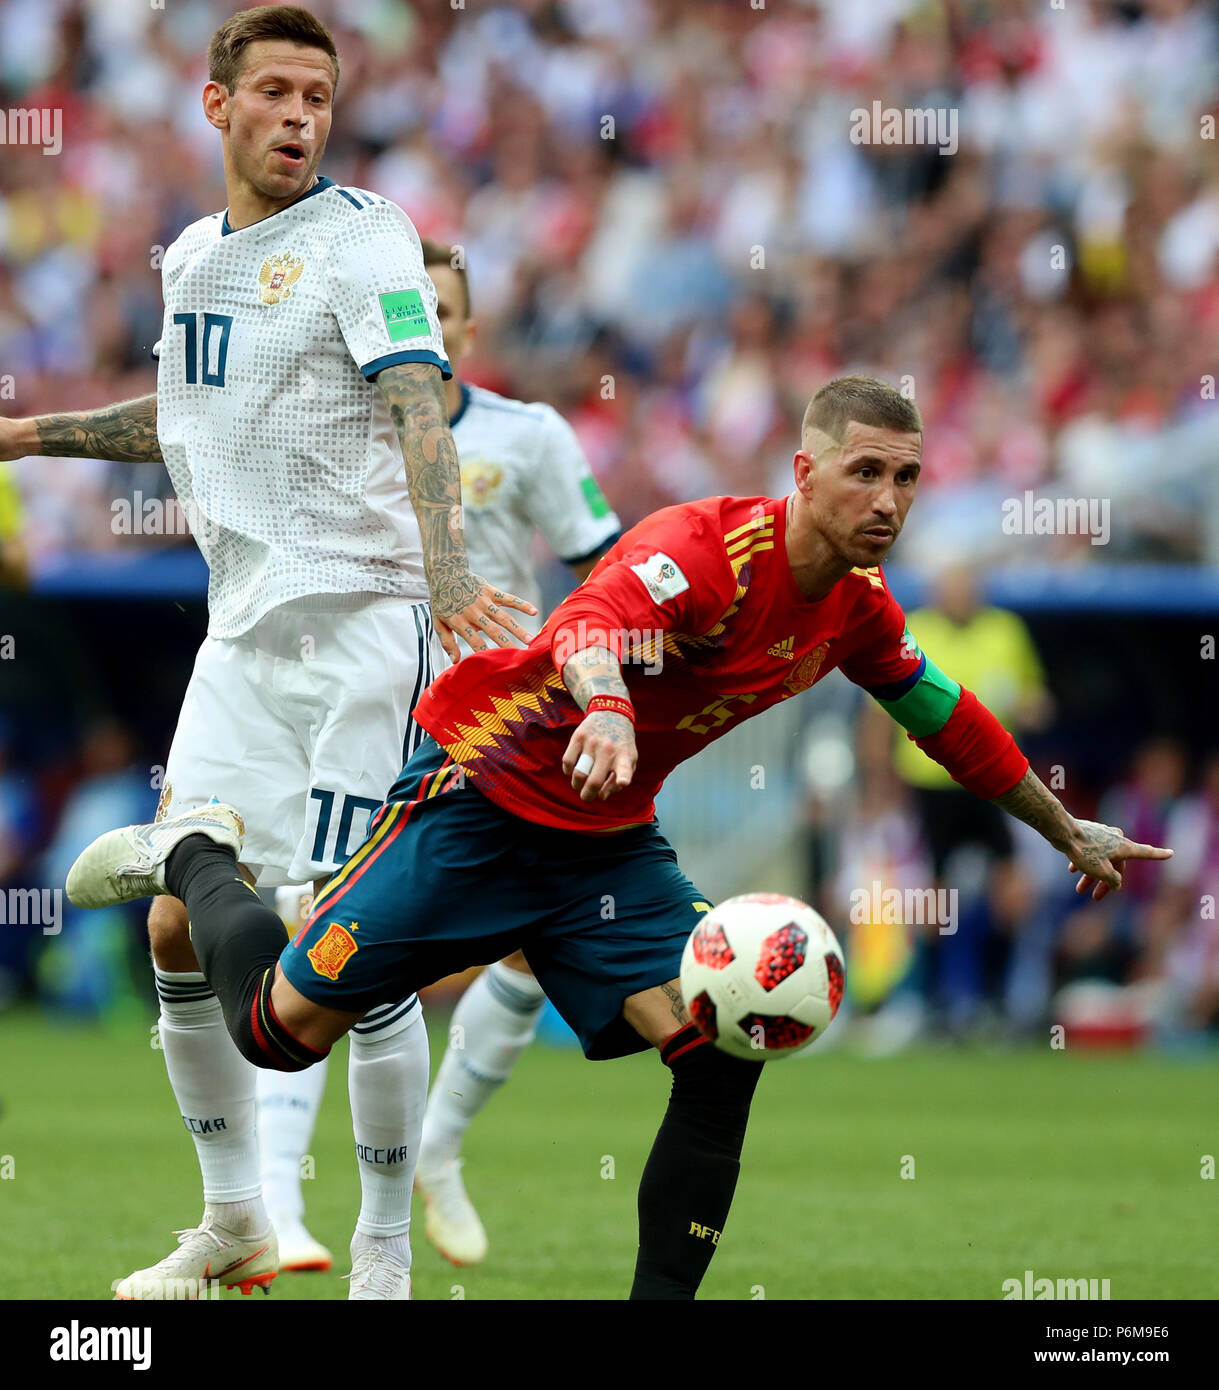 Moscow, Russia. 1st July, 2018. Sergio Ramos (R) of Spain vies with Fedor Smolov of Russia during the 2018 FIFA World Cup round of 16 match between Spain and Russia in Moscow, Russia, July 1, 2018. Credit: Yang Lei/Xinhua/Alamy Live News Stock Photo